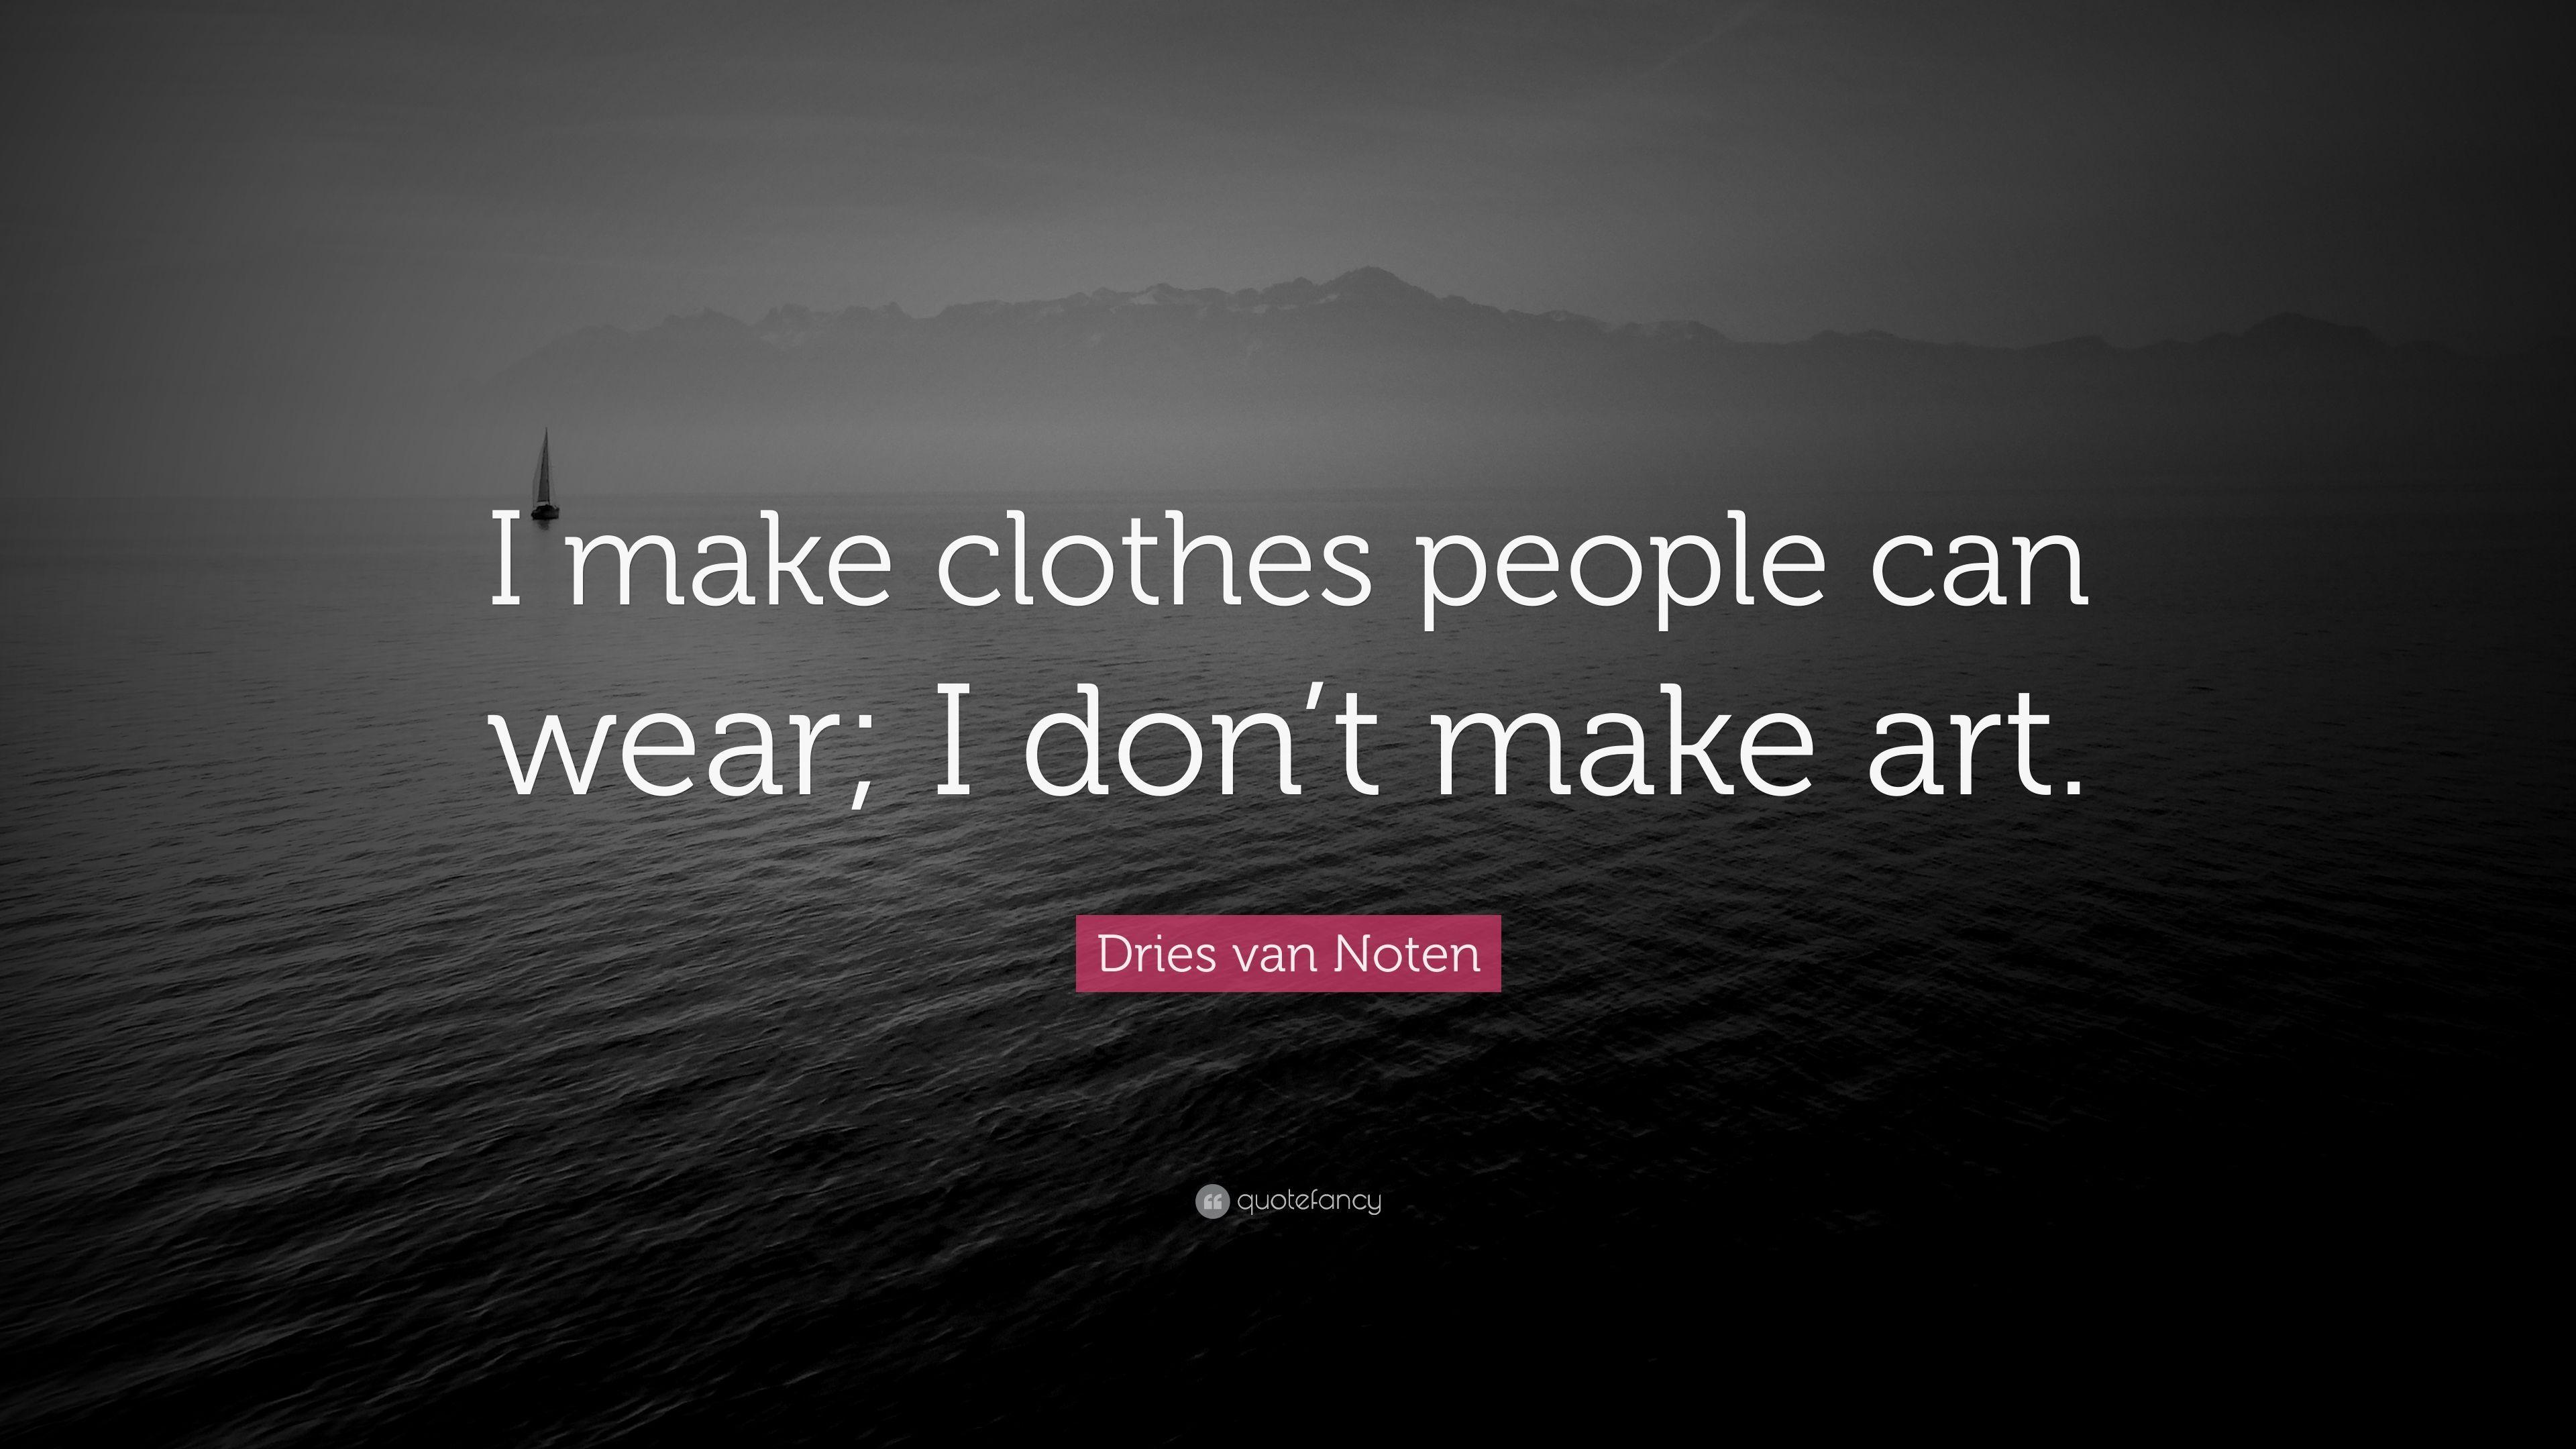 Dries van Noten Quote: “I make clothes people can wear; I don't make